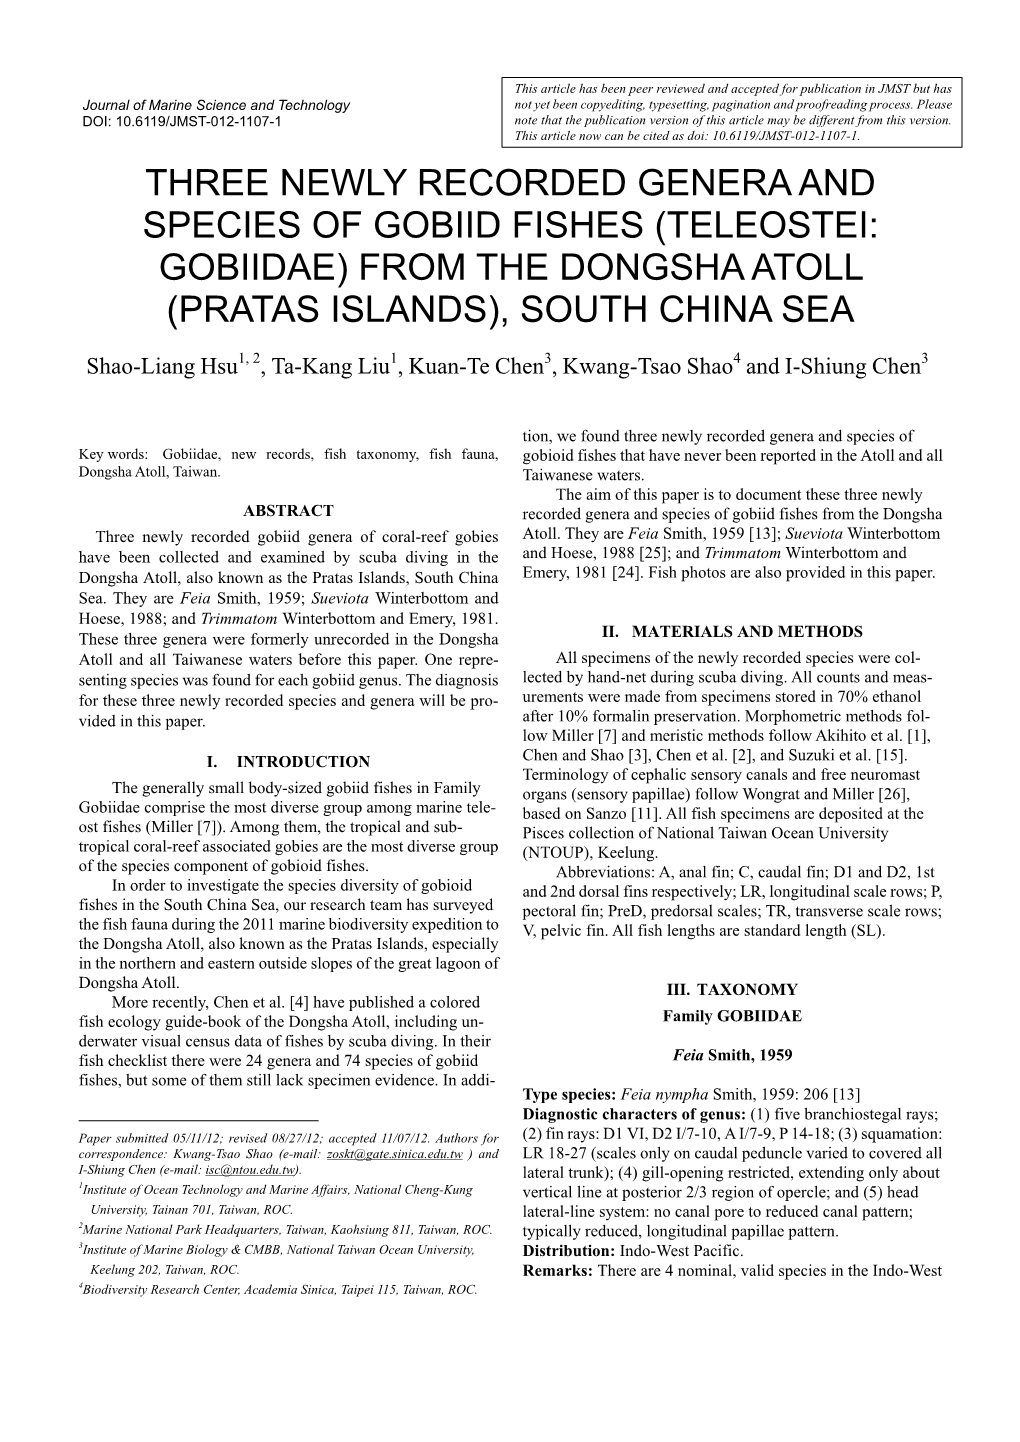 Three Newly Recorded Genera and Species of Gobiid Fishes (Teleostei: Gobiidae) from the Dongsha Atoll (Pratas Islands), South China Sea